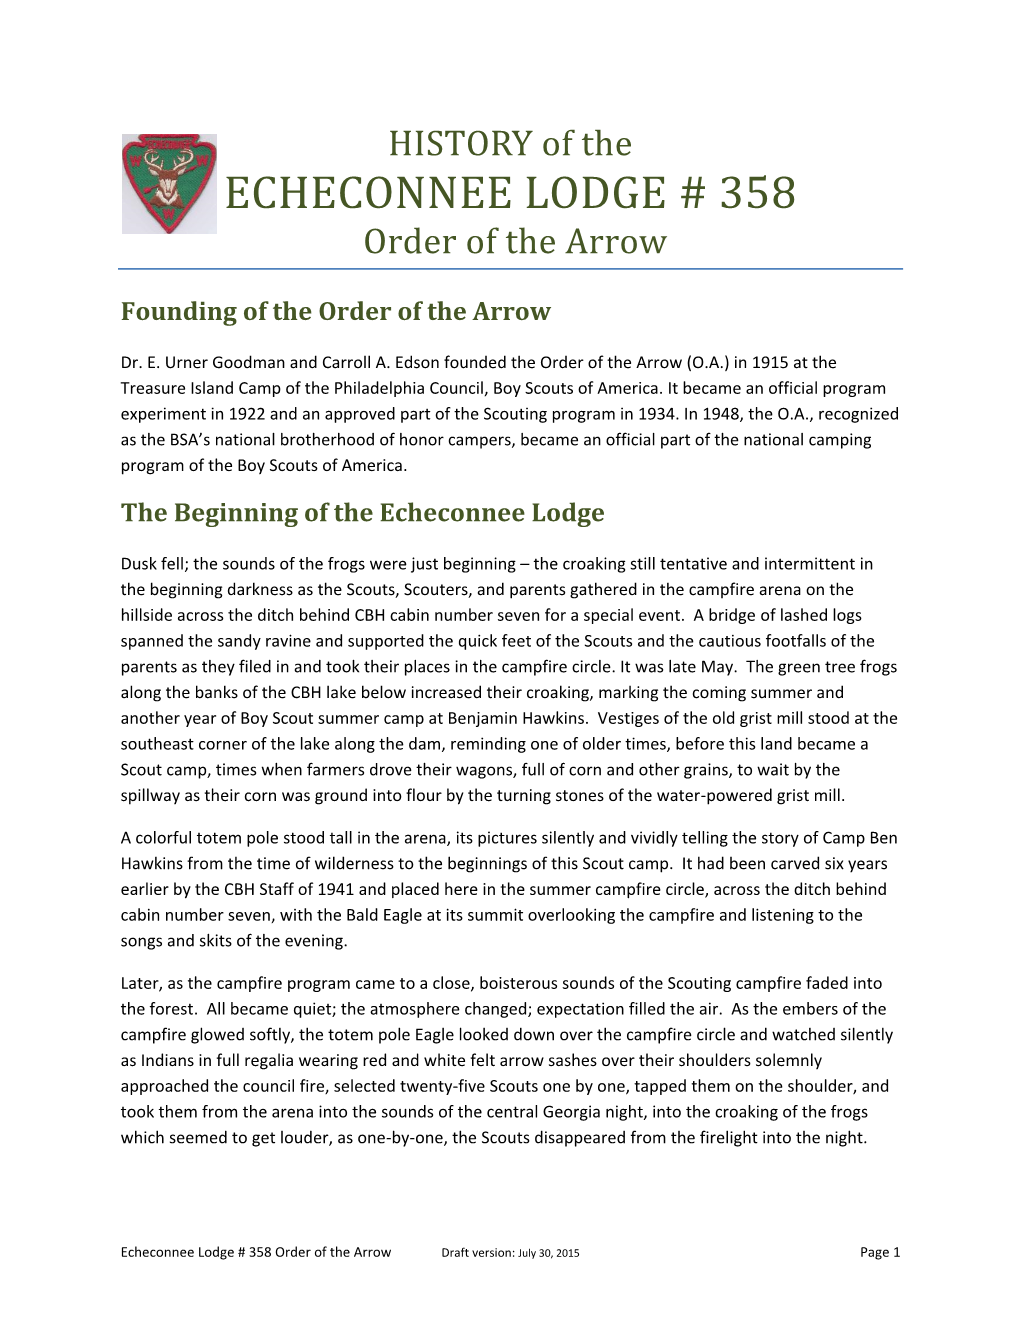 ECHECONNEE LODGE # 358 Order of the Arrow